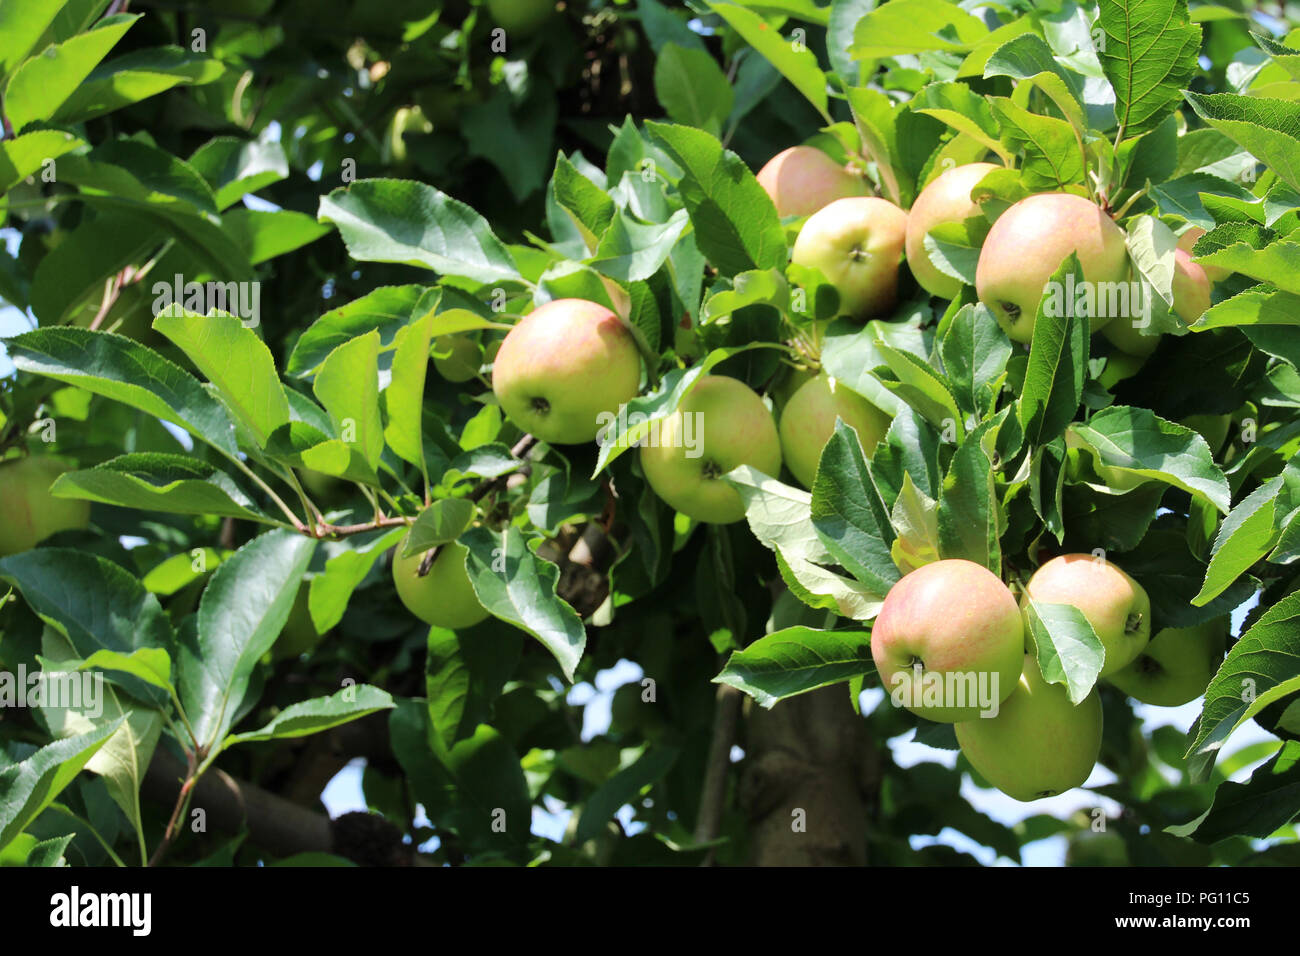 close-up of green, yellow, red apples growing on tree in orchard, against background of dark green leaves in sunlight with shadows Stock Photo